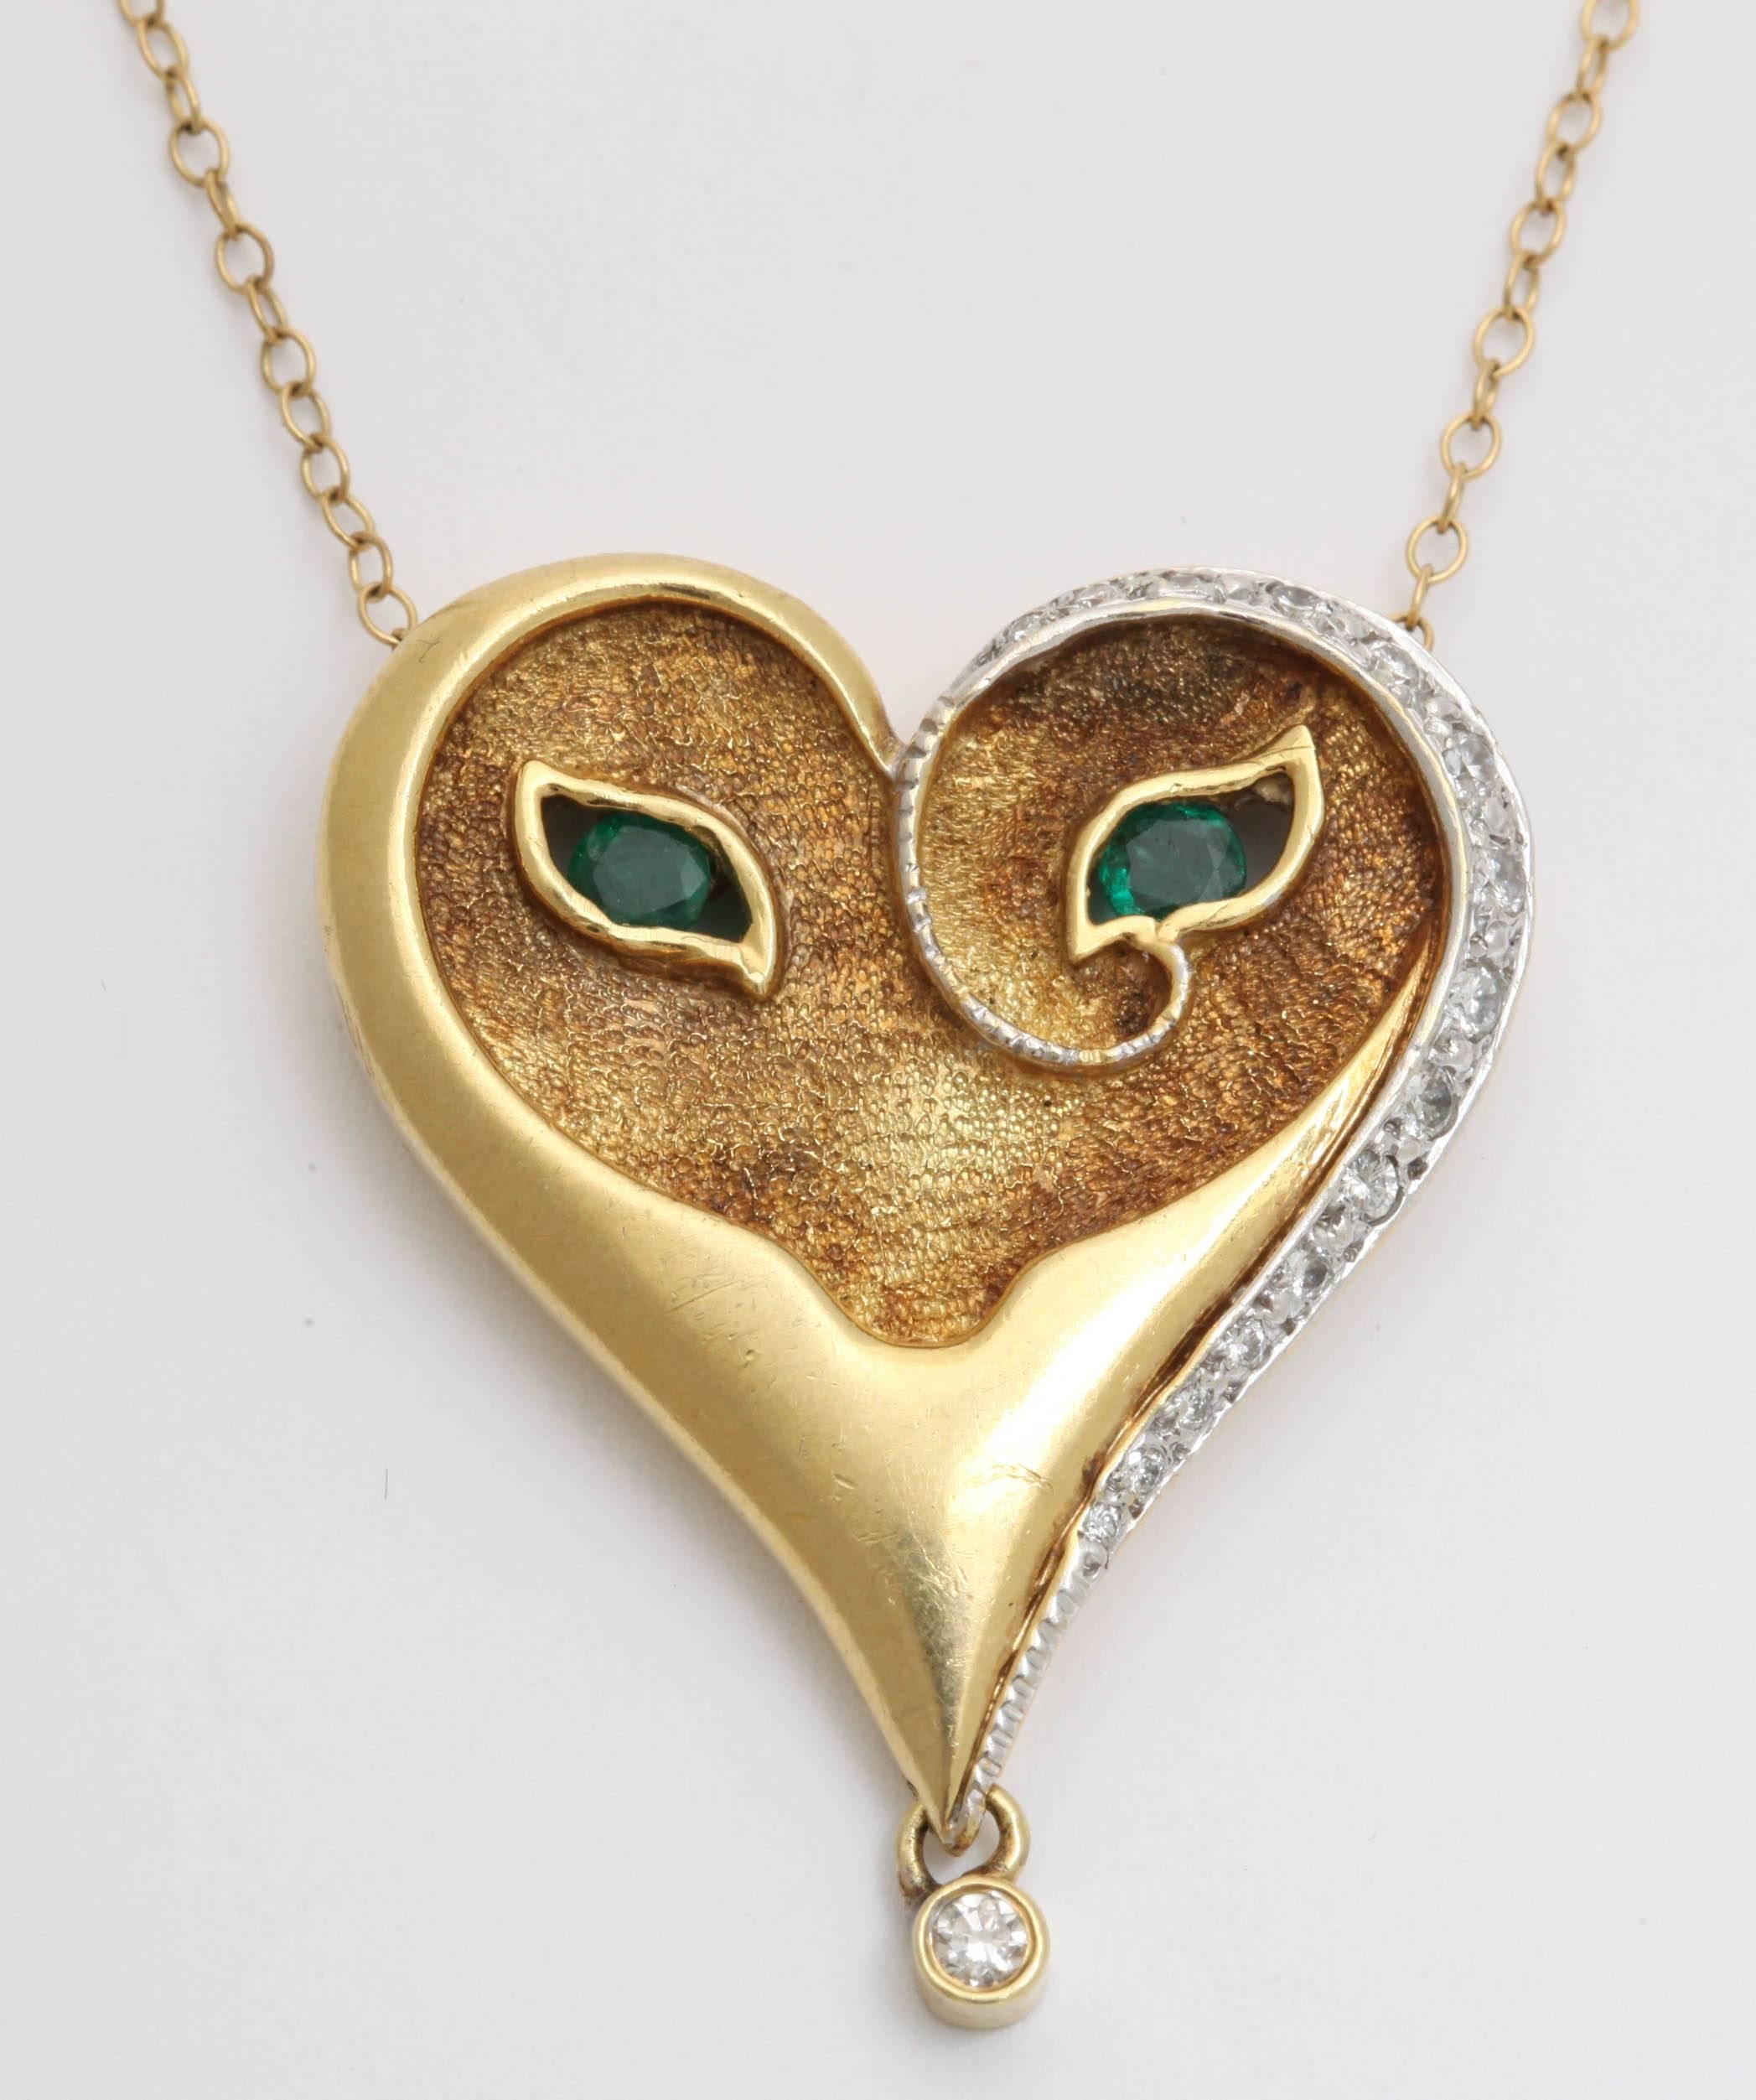 A wonderful early edition  18-karat gold figural pendant with emerald eyes in a sculptural mask and a diamond bezel set question mark signed in the back by Erte. Pendant measures: 2.5